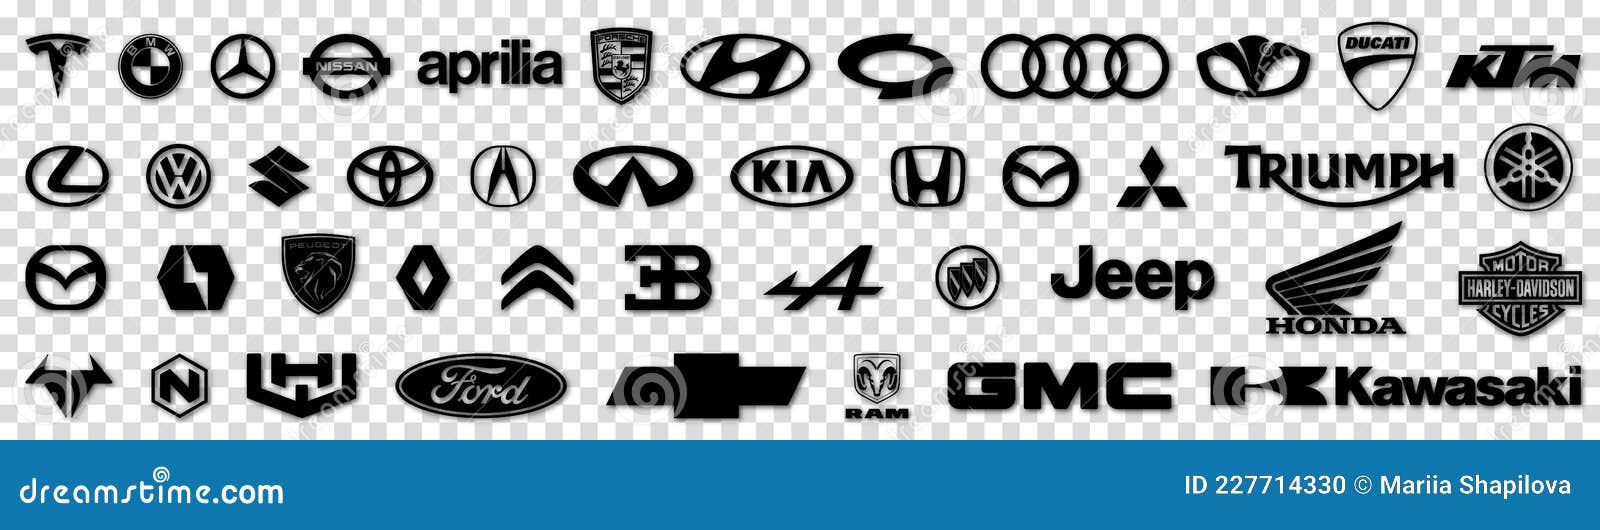 Popular Car and Motorcycle Brands Logos Editorial Image ...